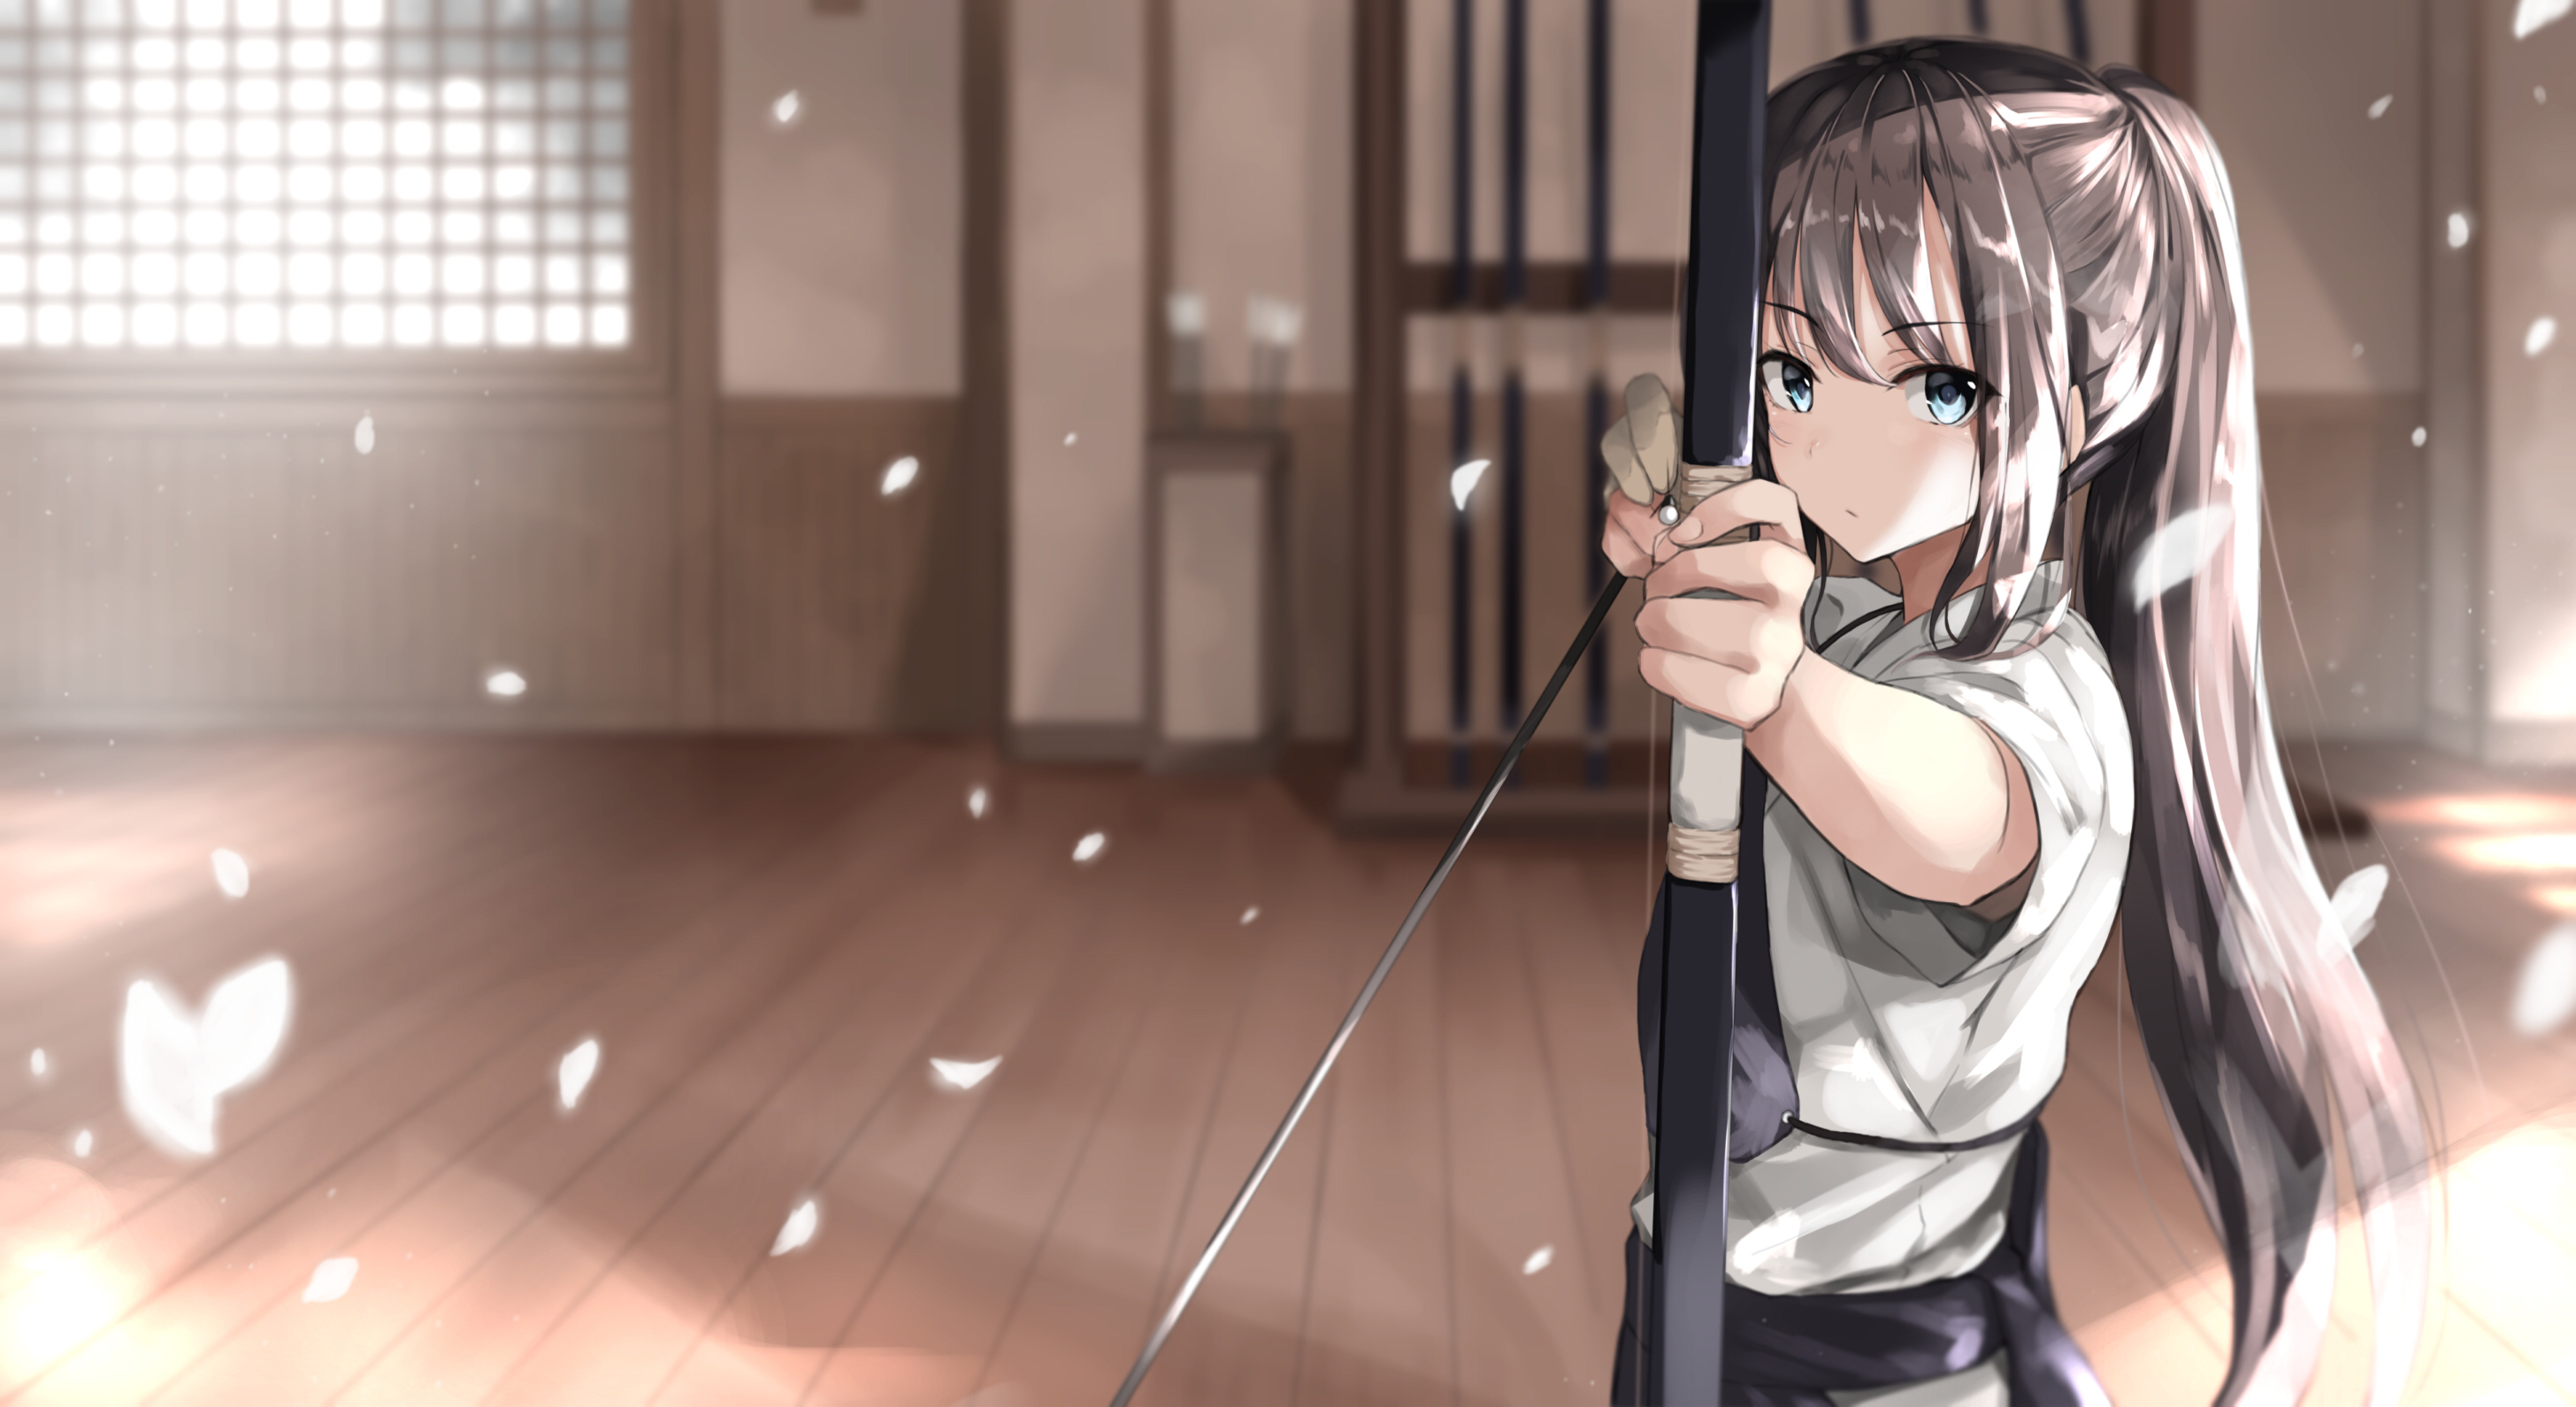 Stockings bows anime arrows archery anime girls original characters Kantai  Collection wallpaper  1920x1080  283611  WallpaperUP